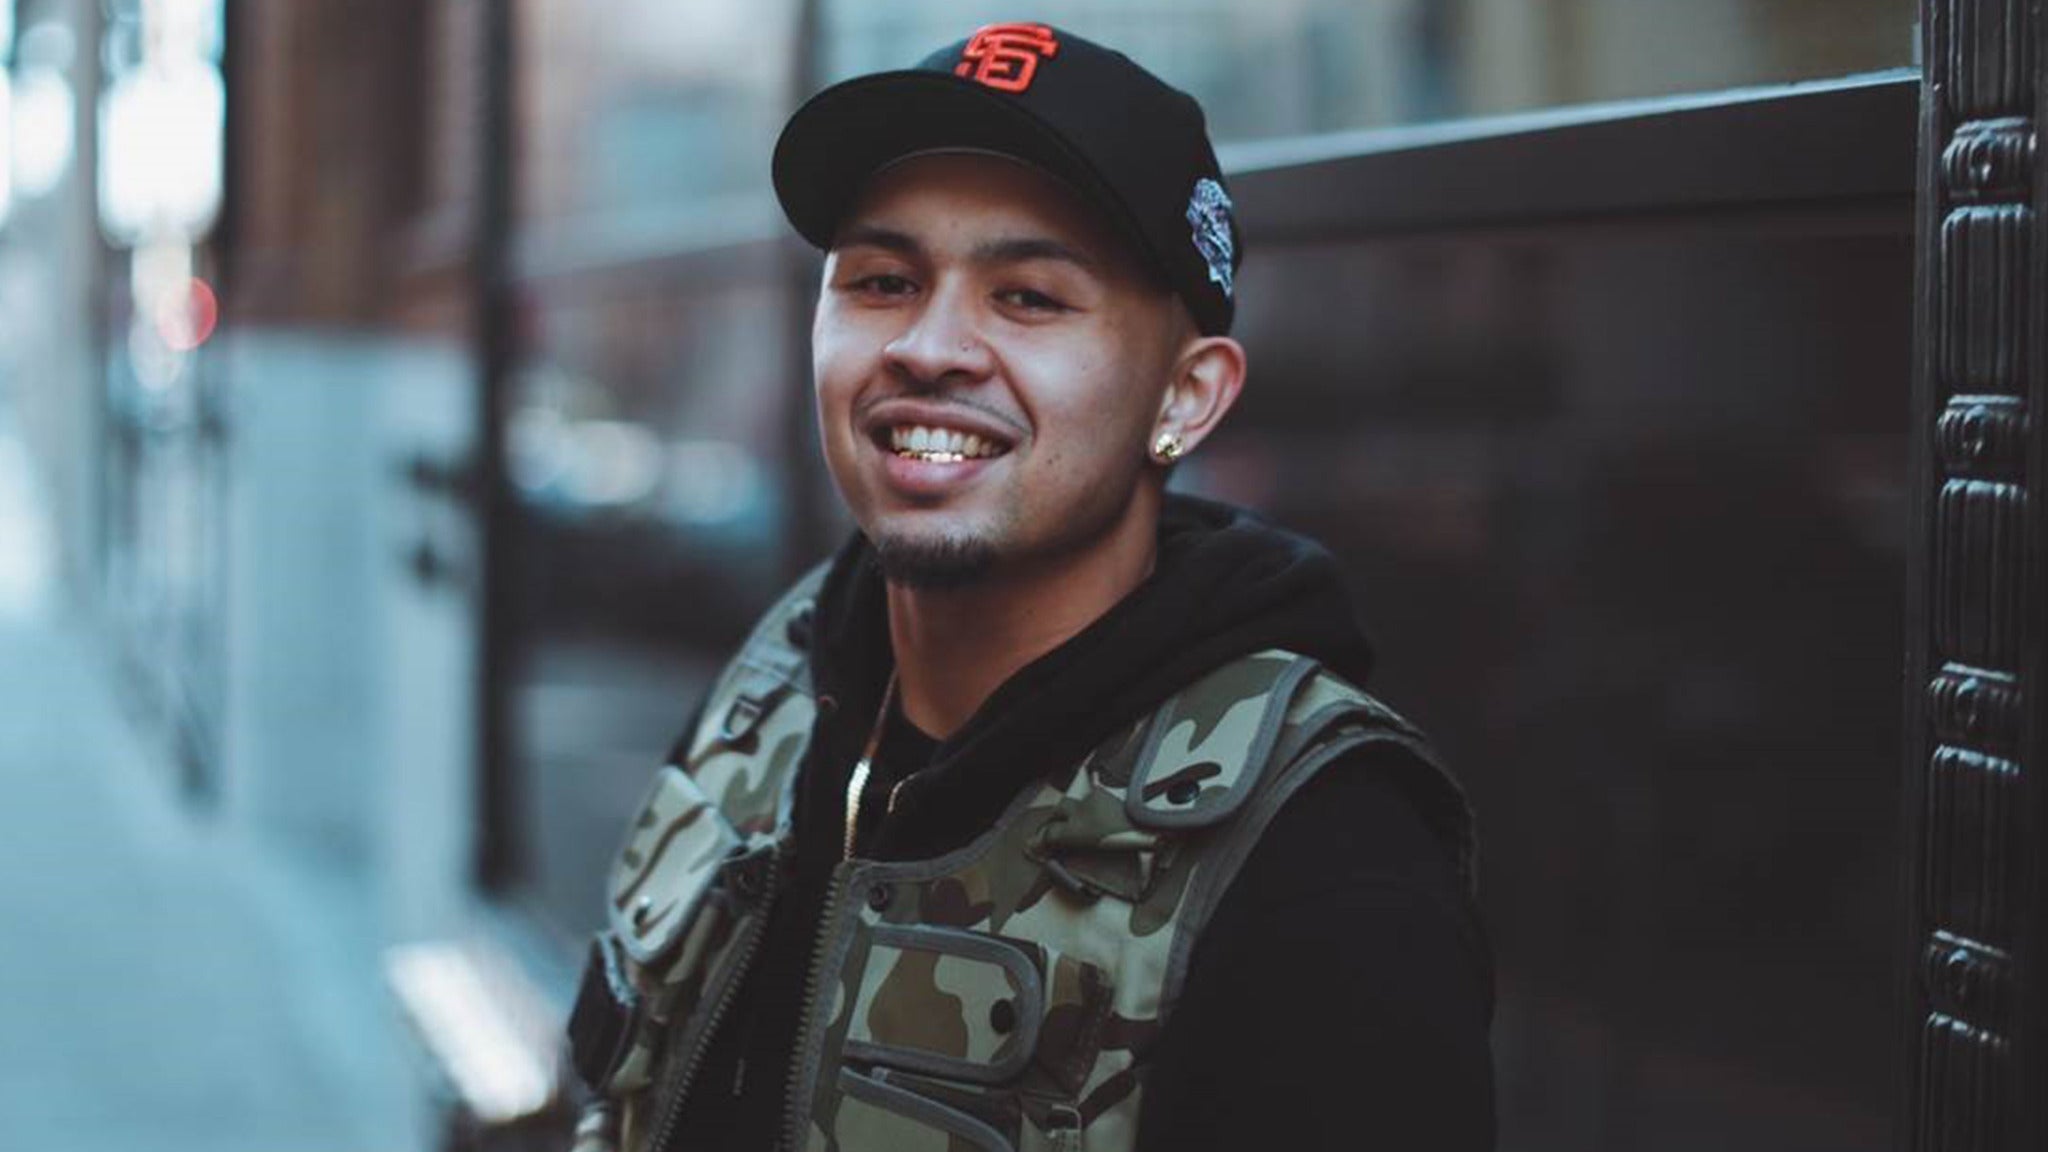 P-Lo in Columbus promo photo for Spotify presale offer code